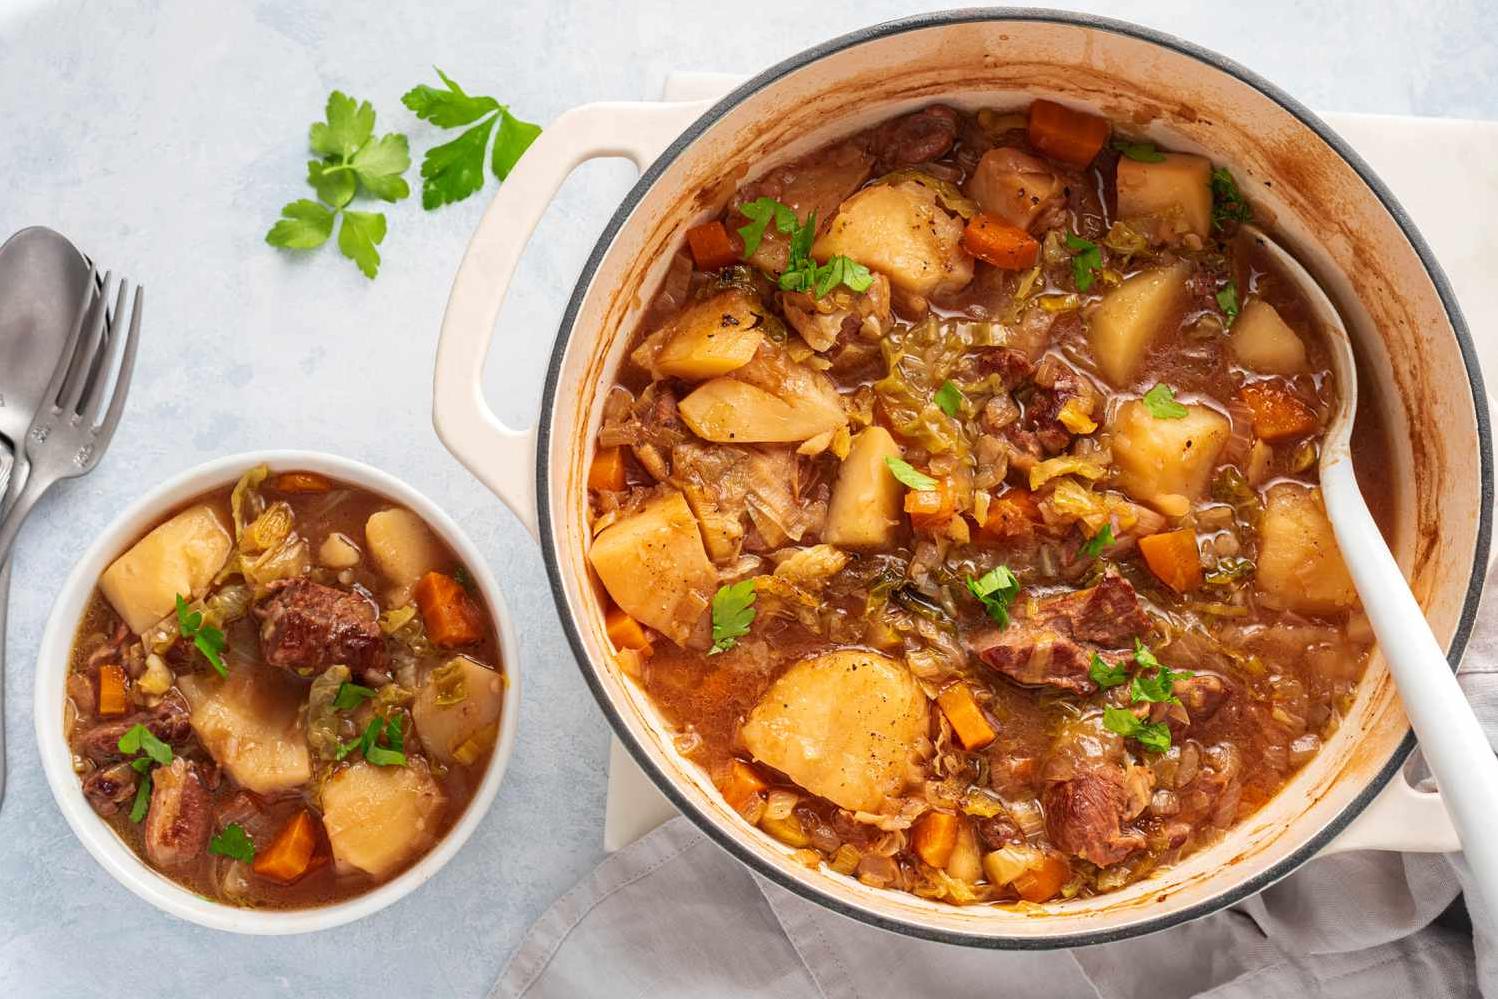  Hearty Irish Stew, perfect for cold winter nights